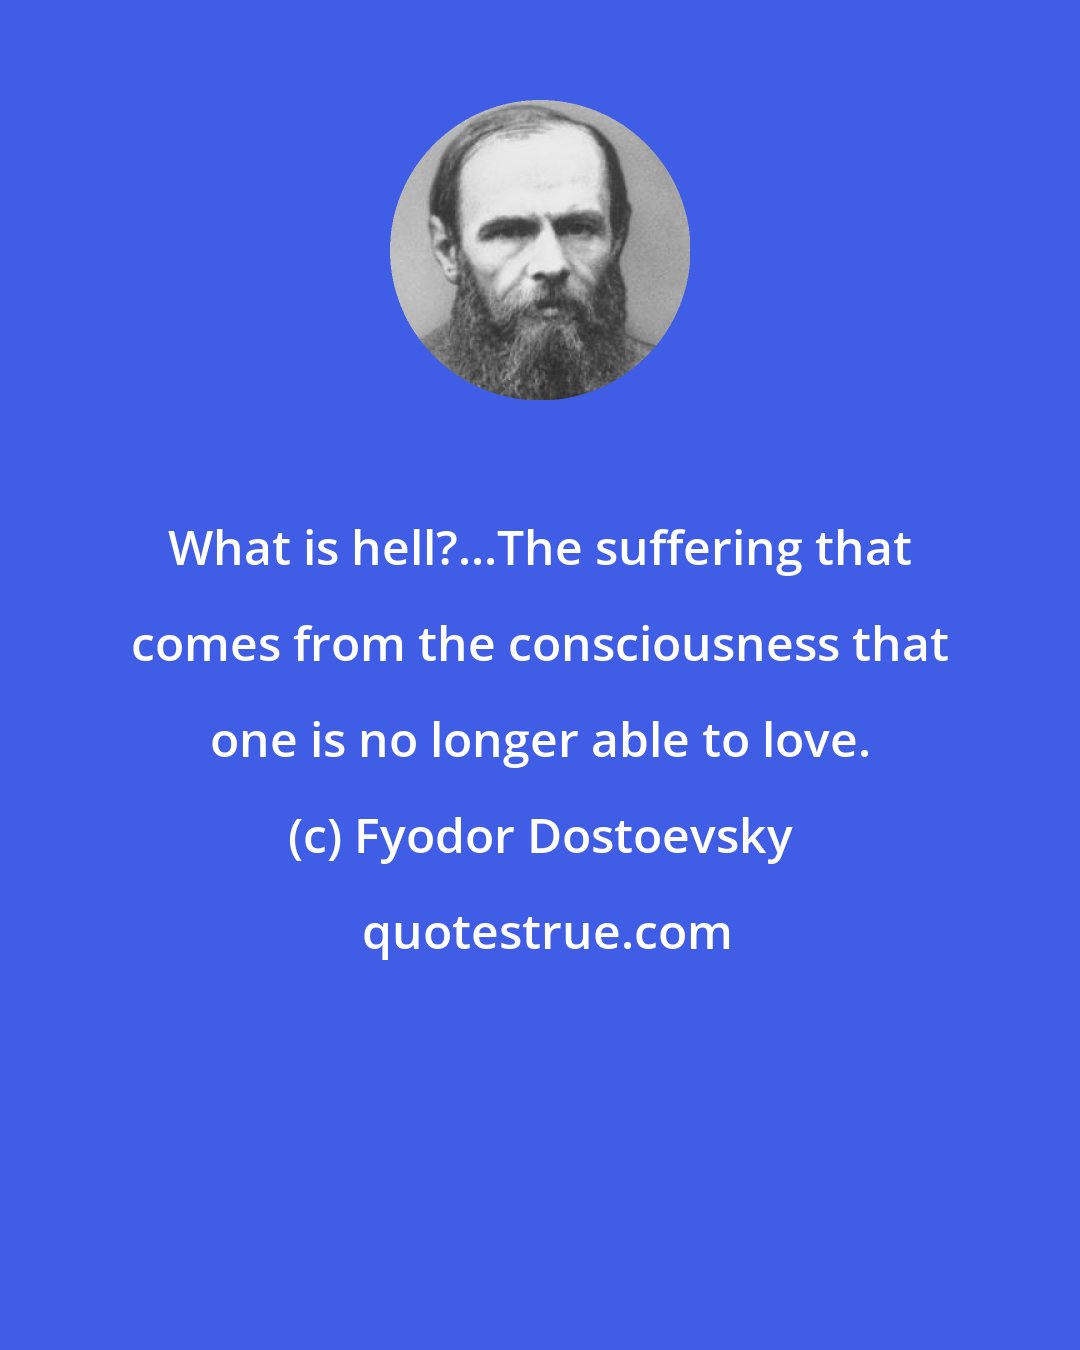 Fyodor Dostoevsky: What is hell?...The suffering that comes from the consciousness that one is no longer able to love.